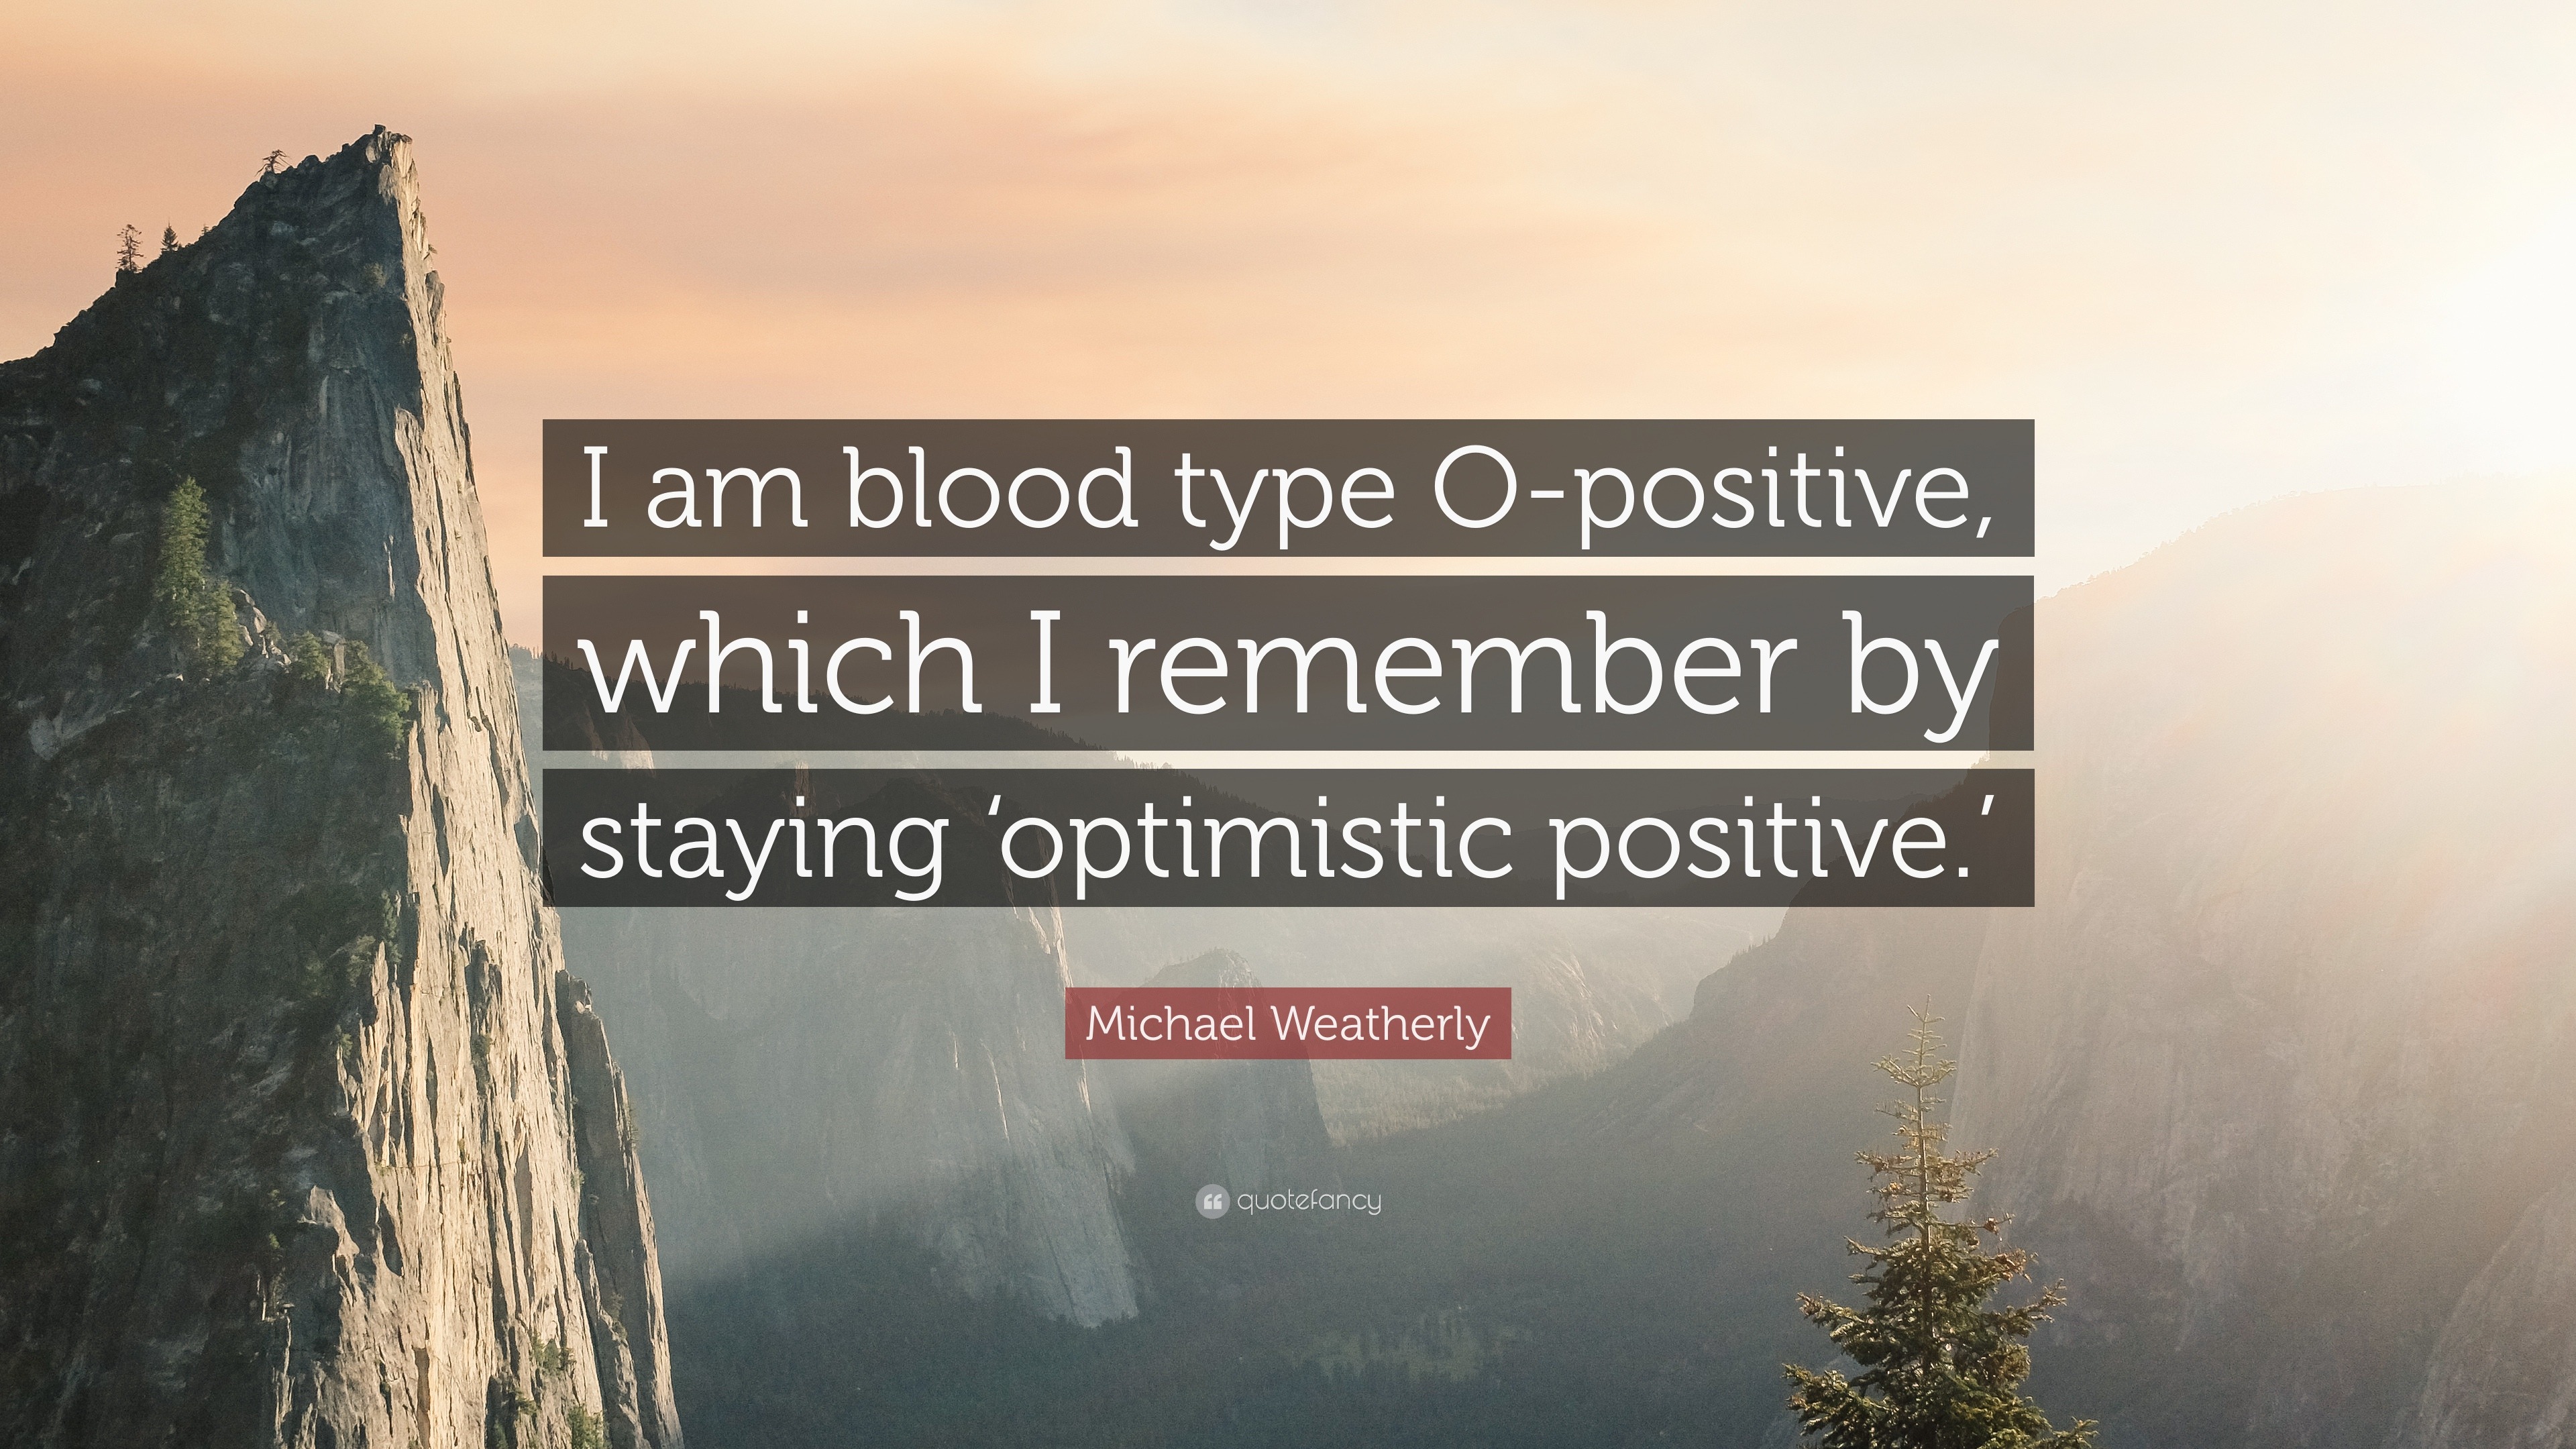 Blood Type O-Positive